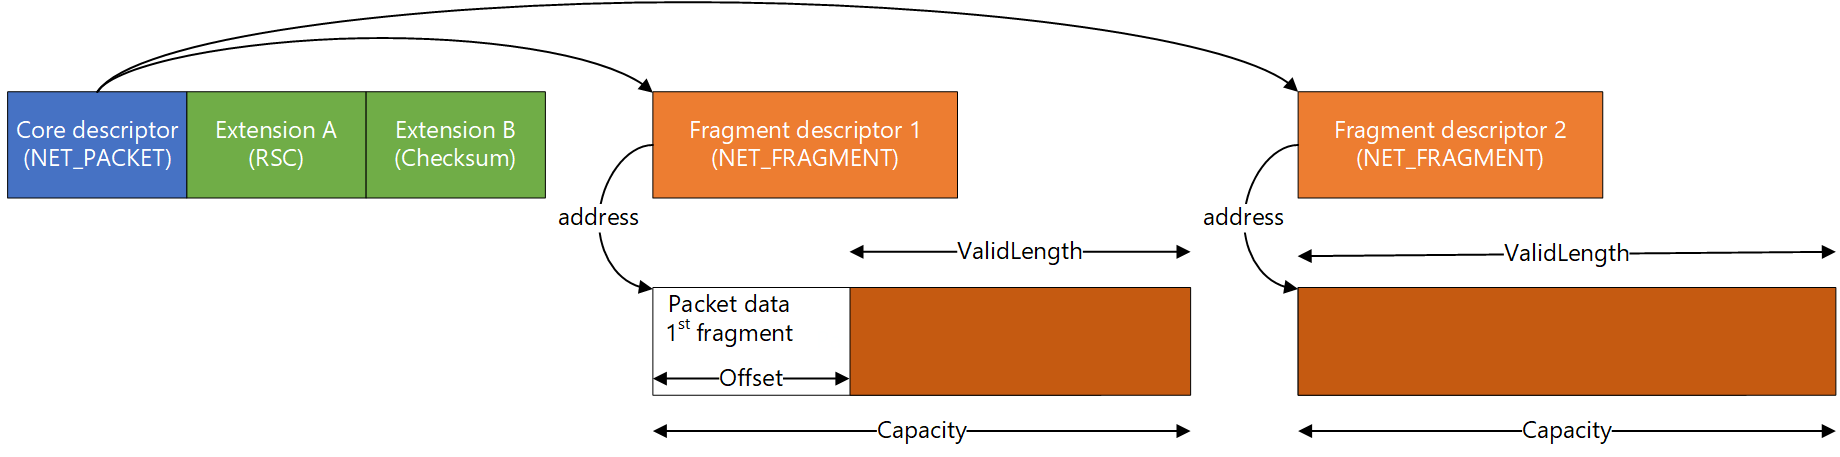 Diagram that shows a packet layout with 2 fragments and 2 extensions.